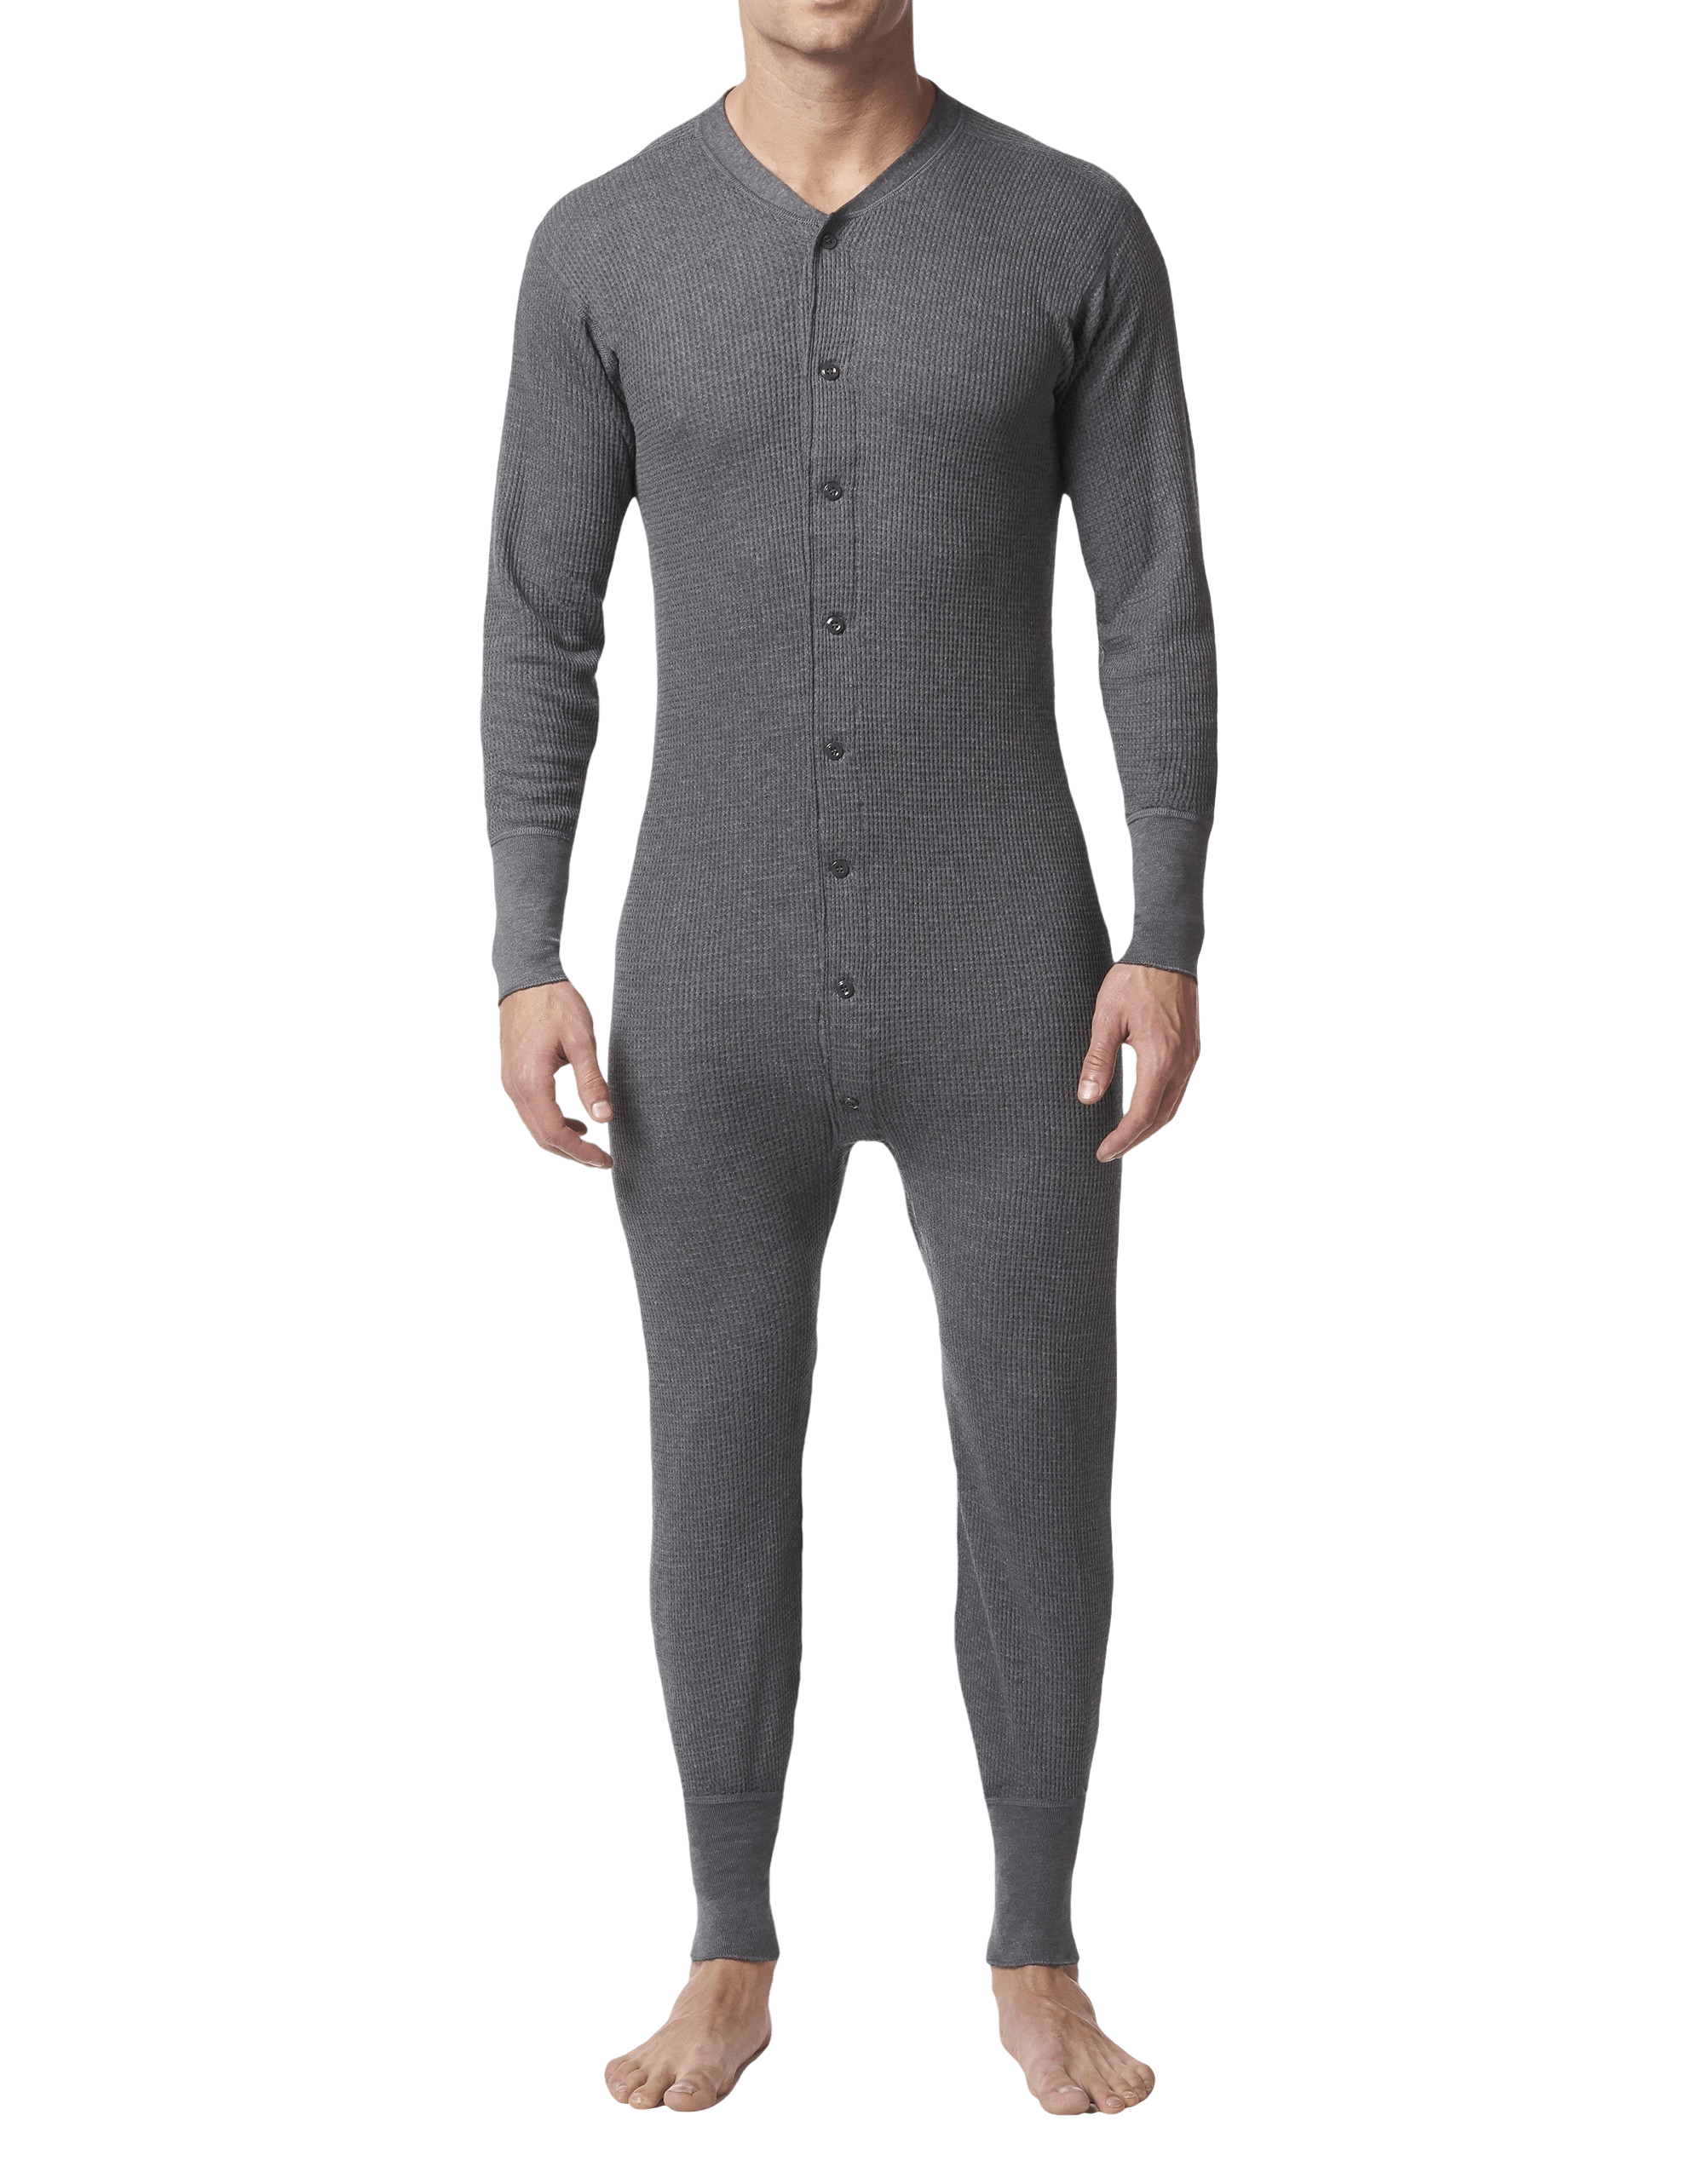 Big and Tall Thermal Underwear to Size 8XB